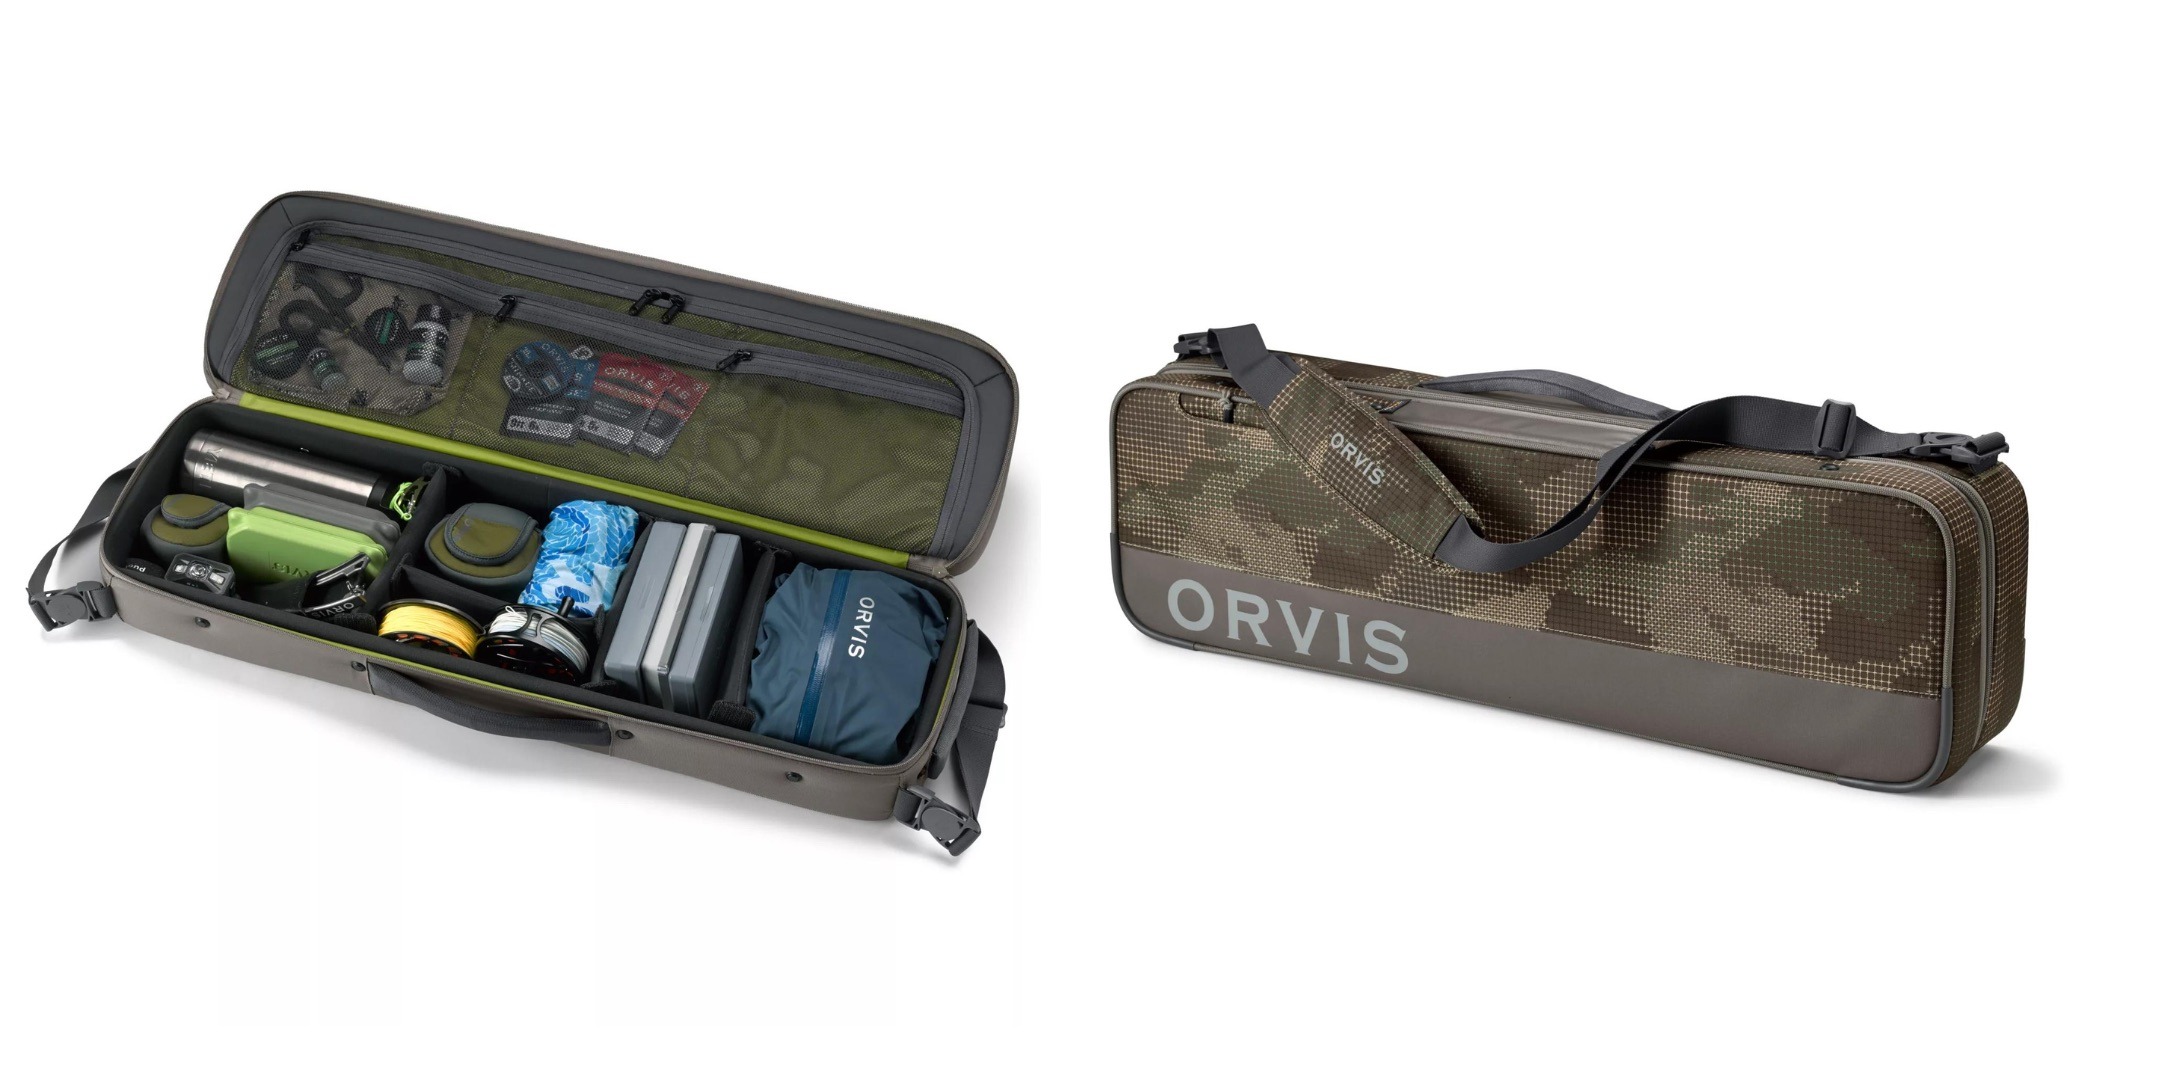 orvis ORVIS Rod And Reel Cases